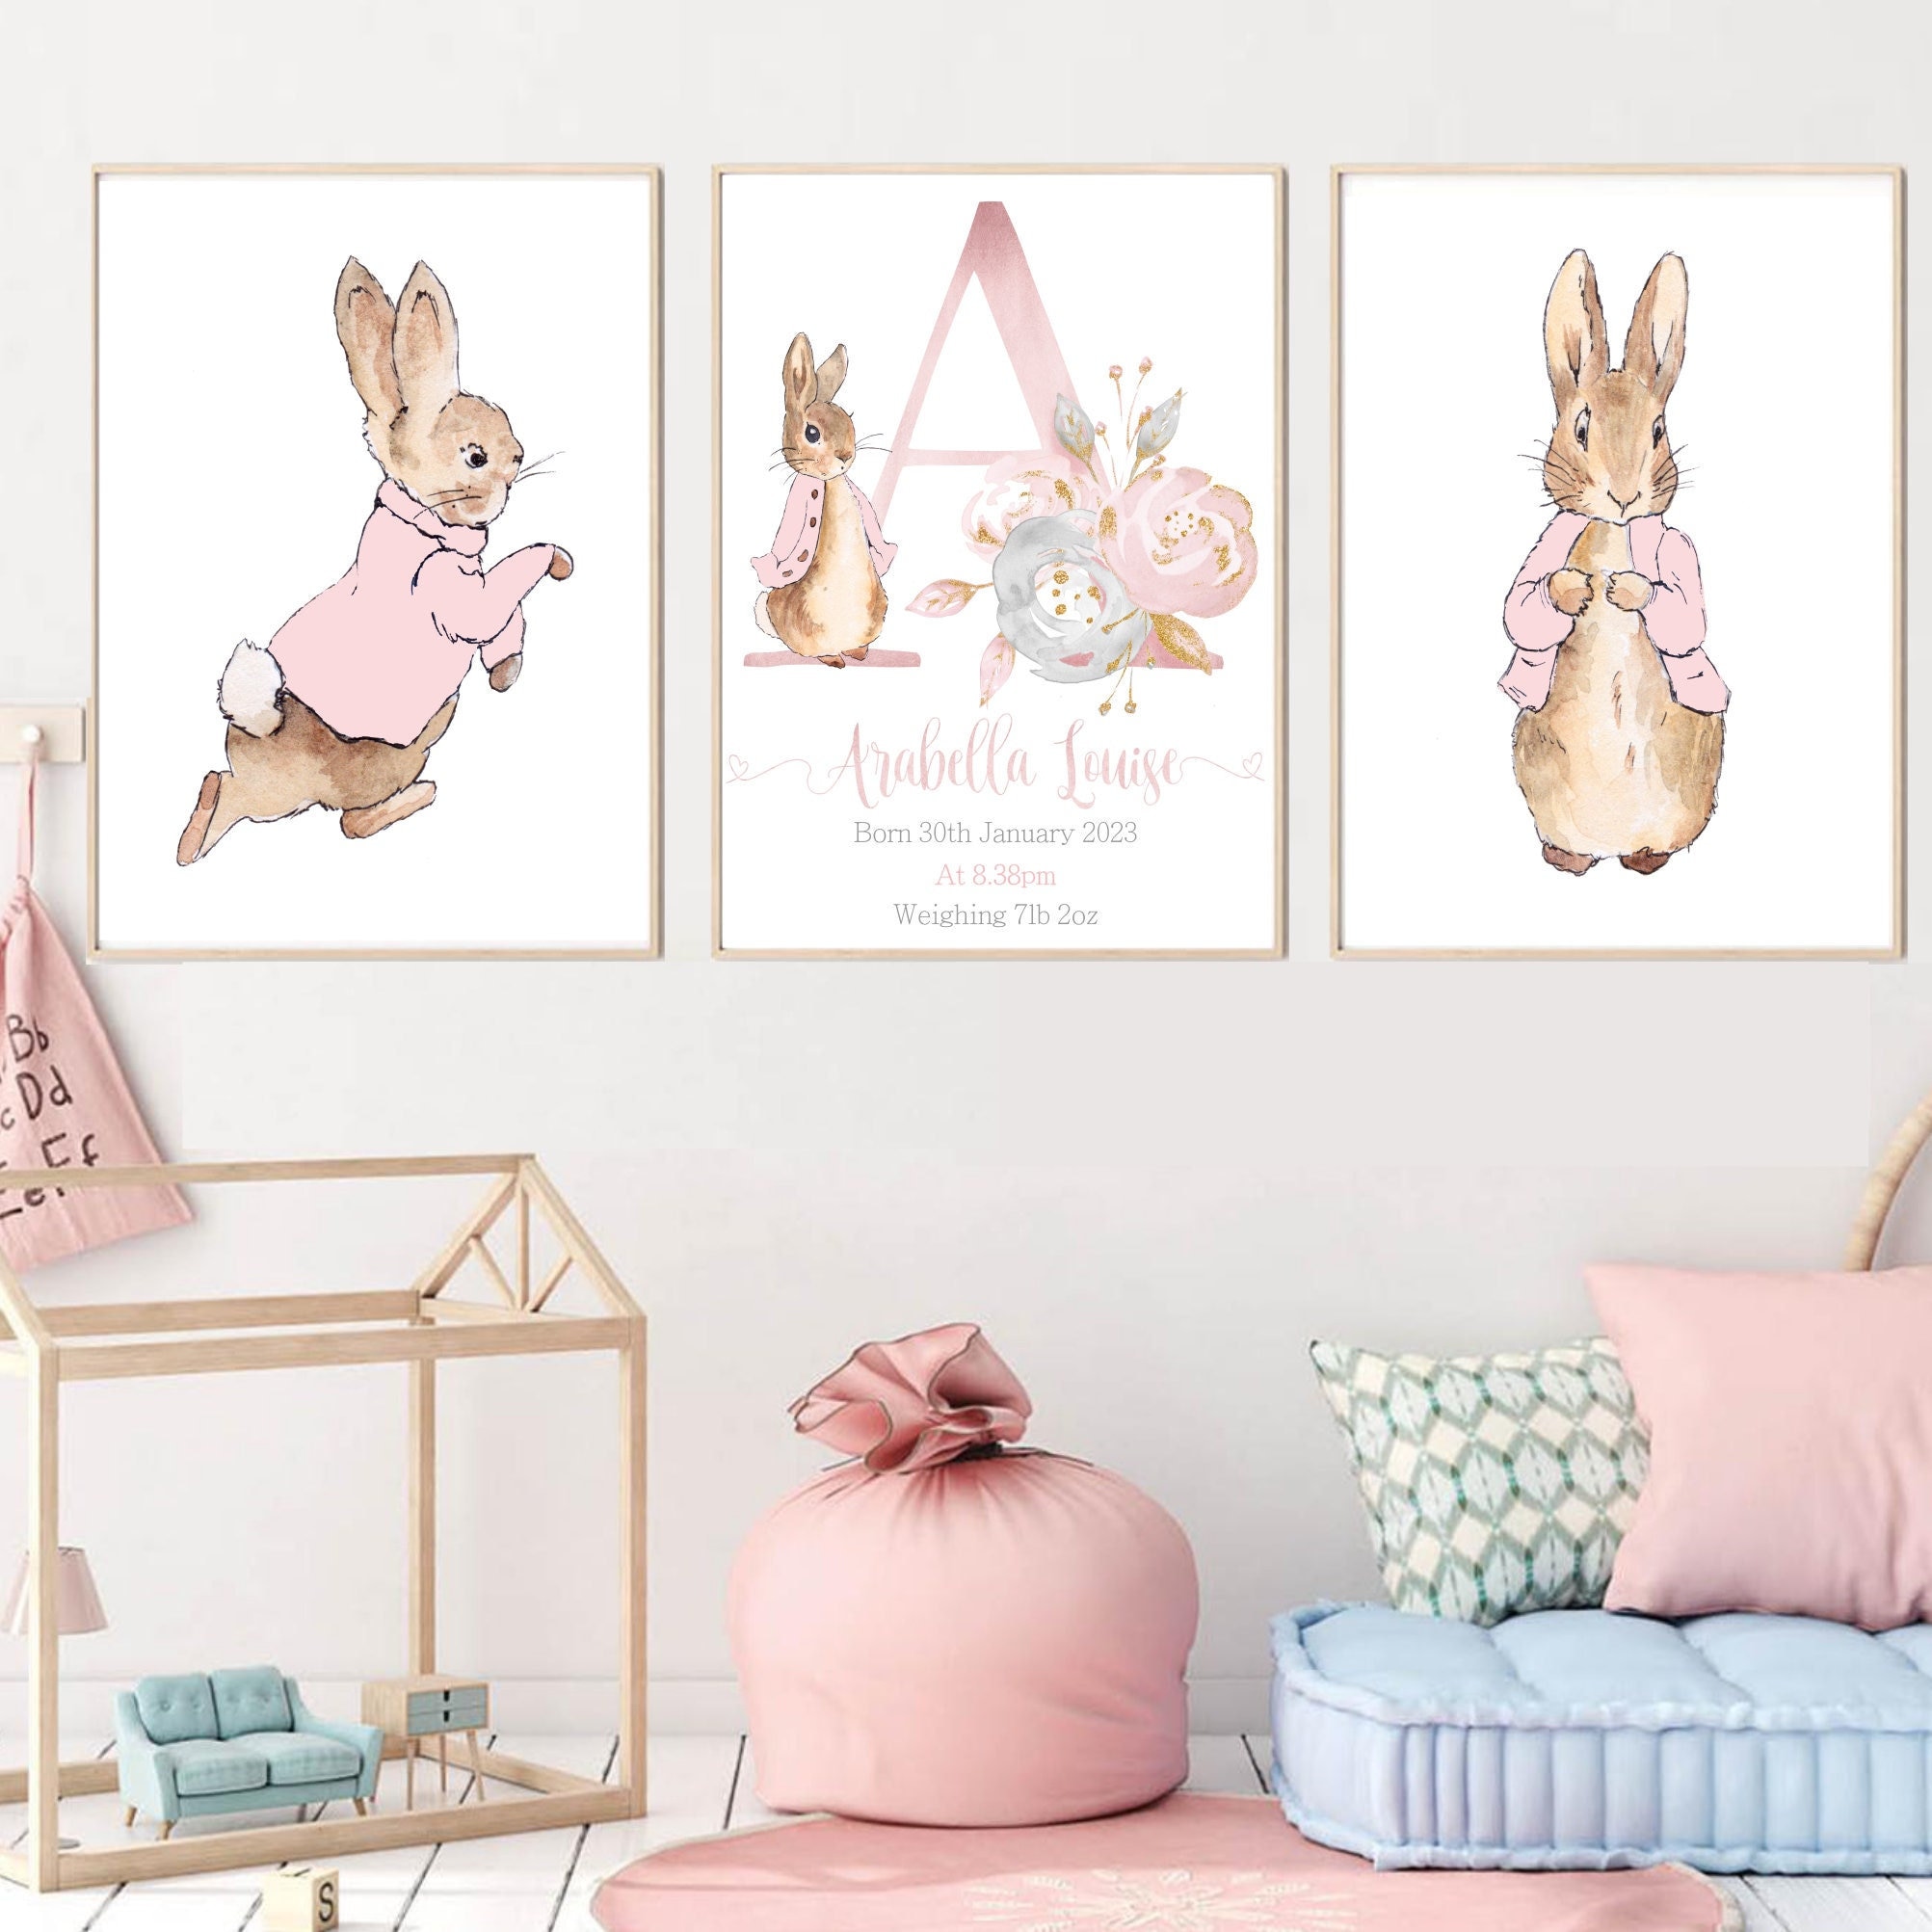 Printed Vintage Beatrix Potter Peter Rabbit and Friends Baby Nursery,  Shower Gift, Baby's Room 8 X 10 or 5 X 7 Set of 4 Unframed 